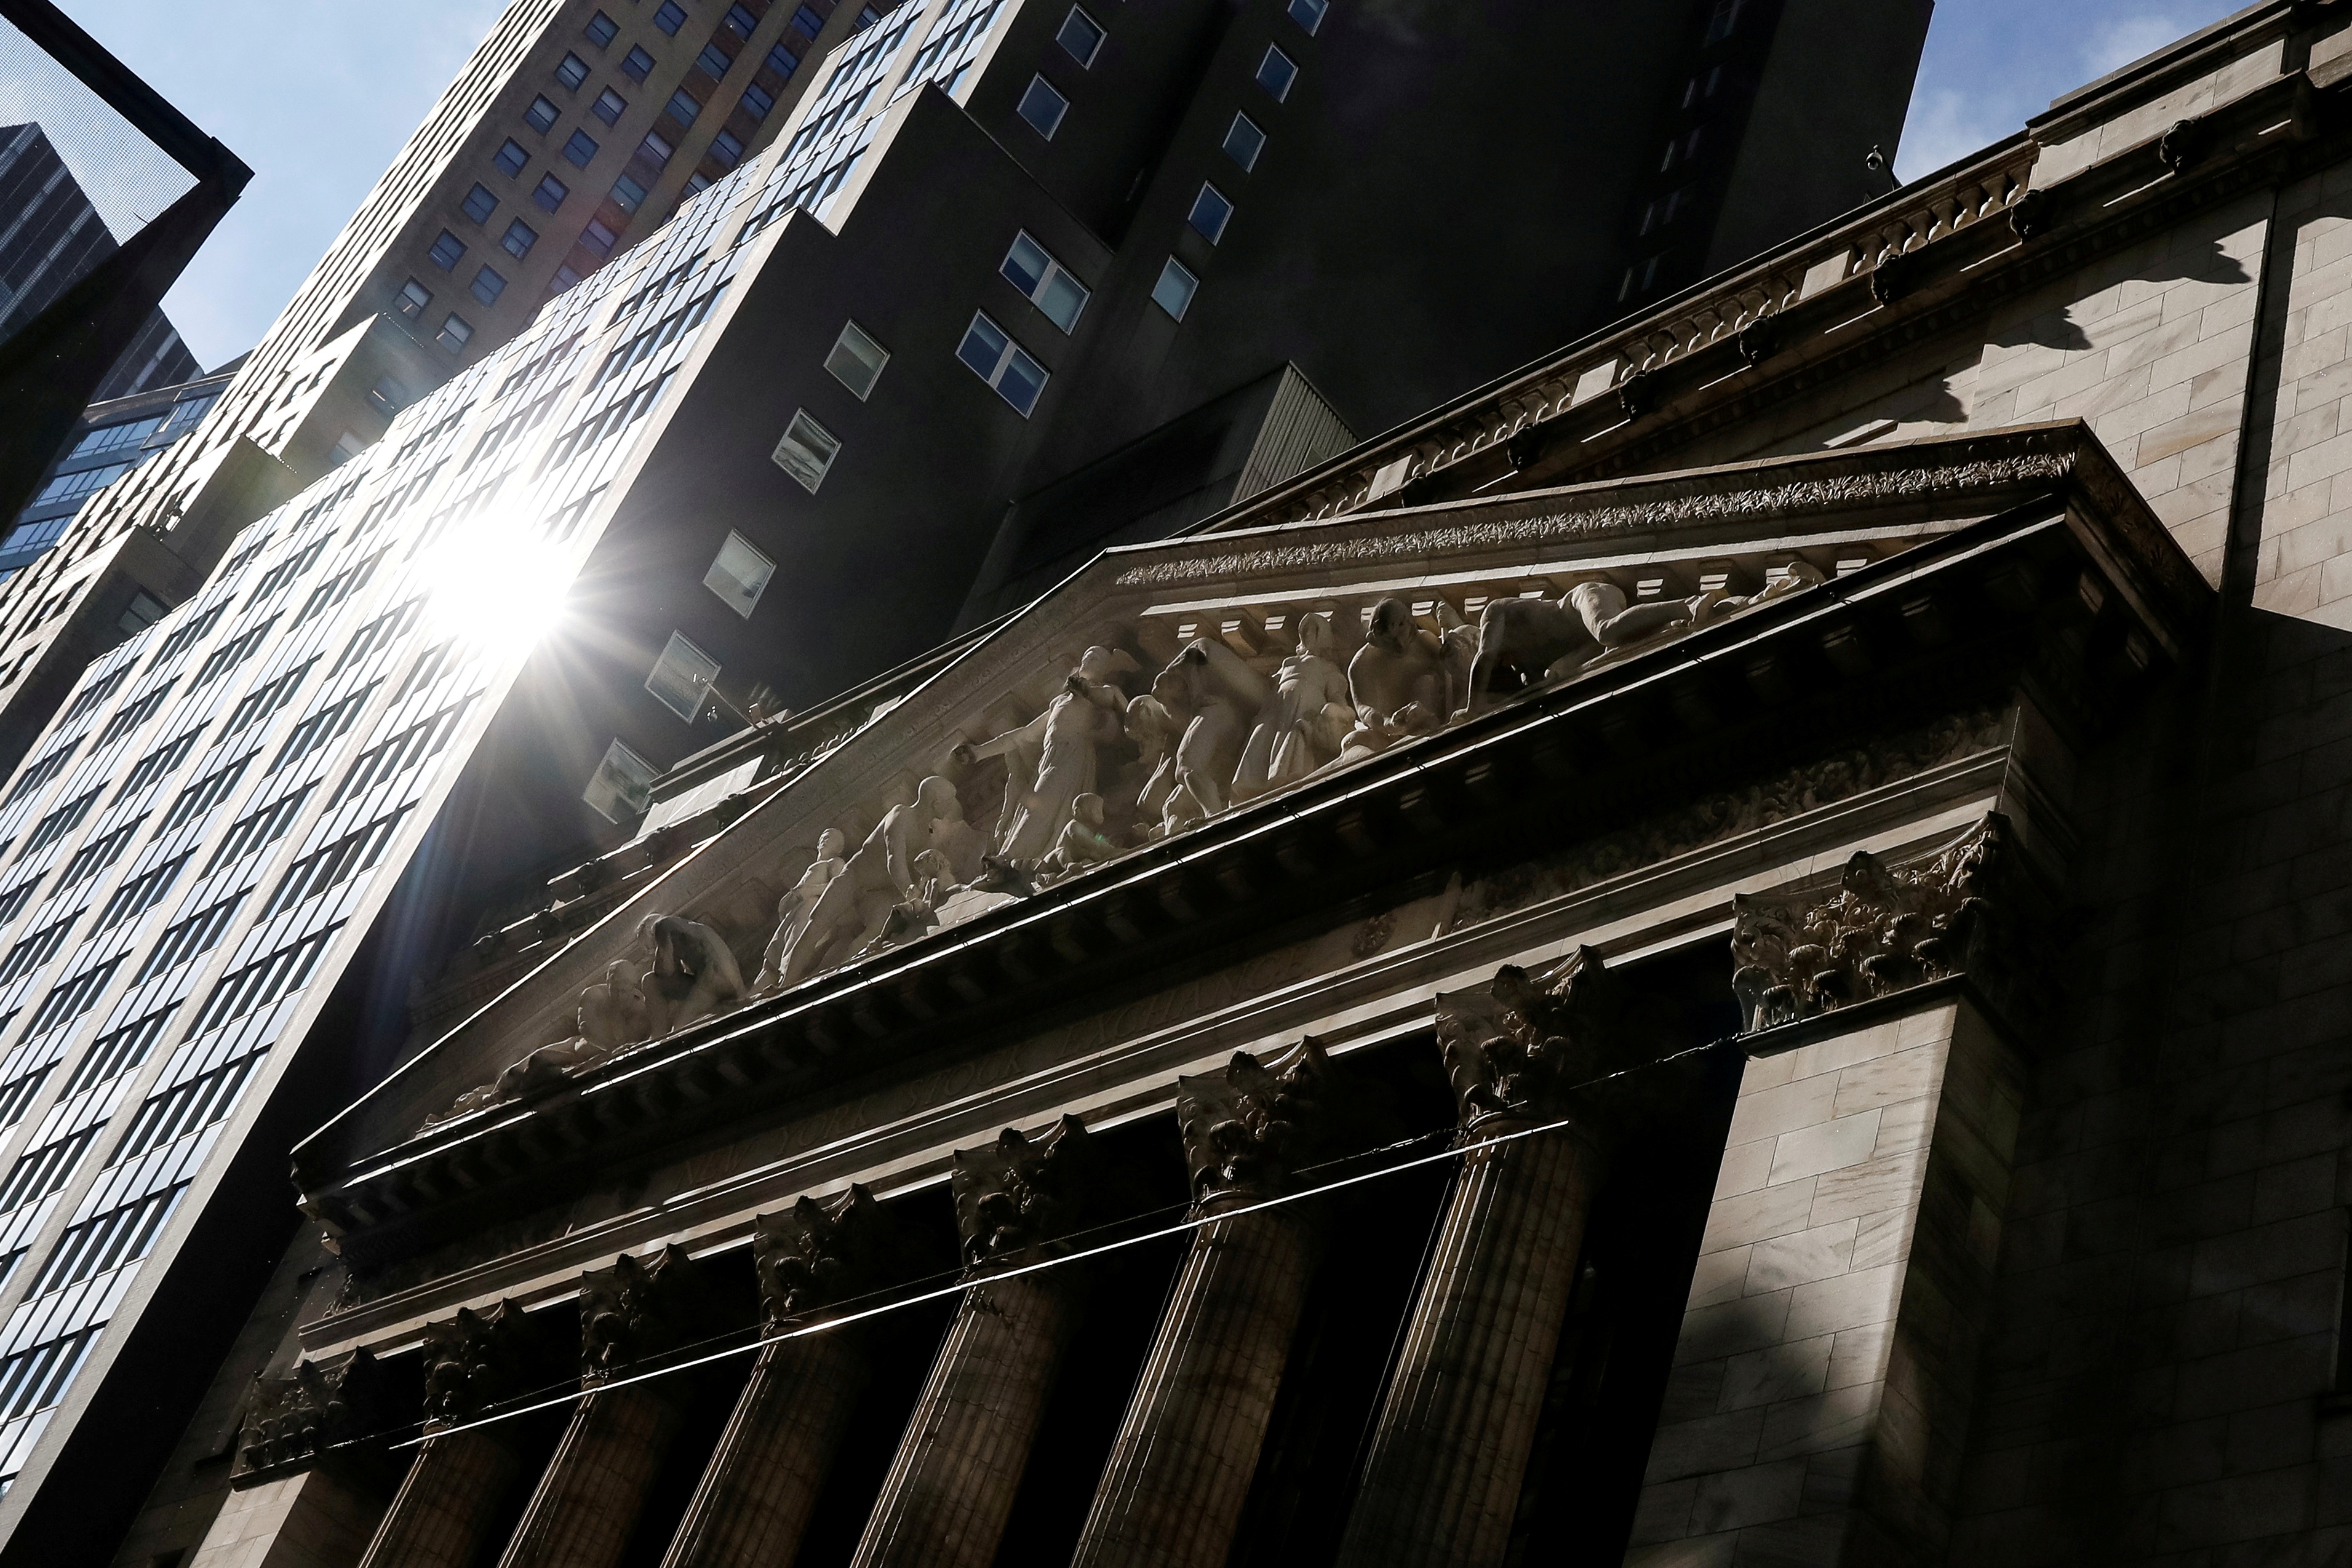 The front facade of the NYSE is seen in New York